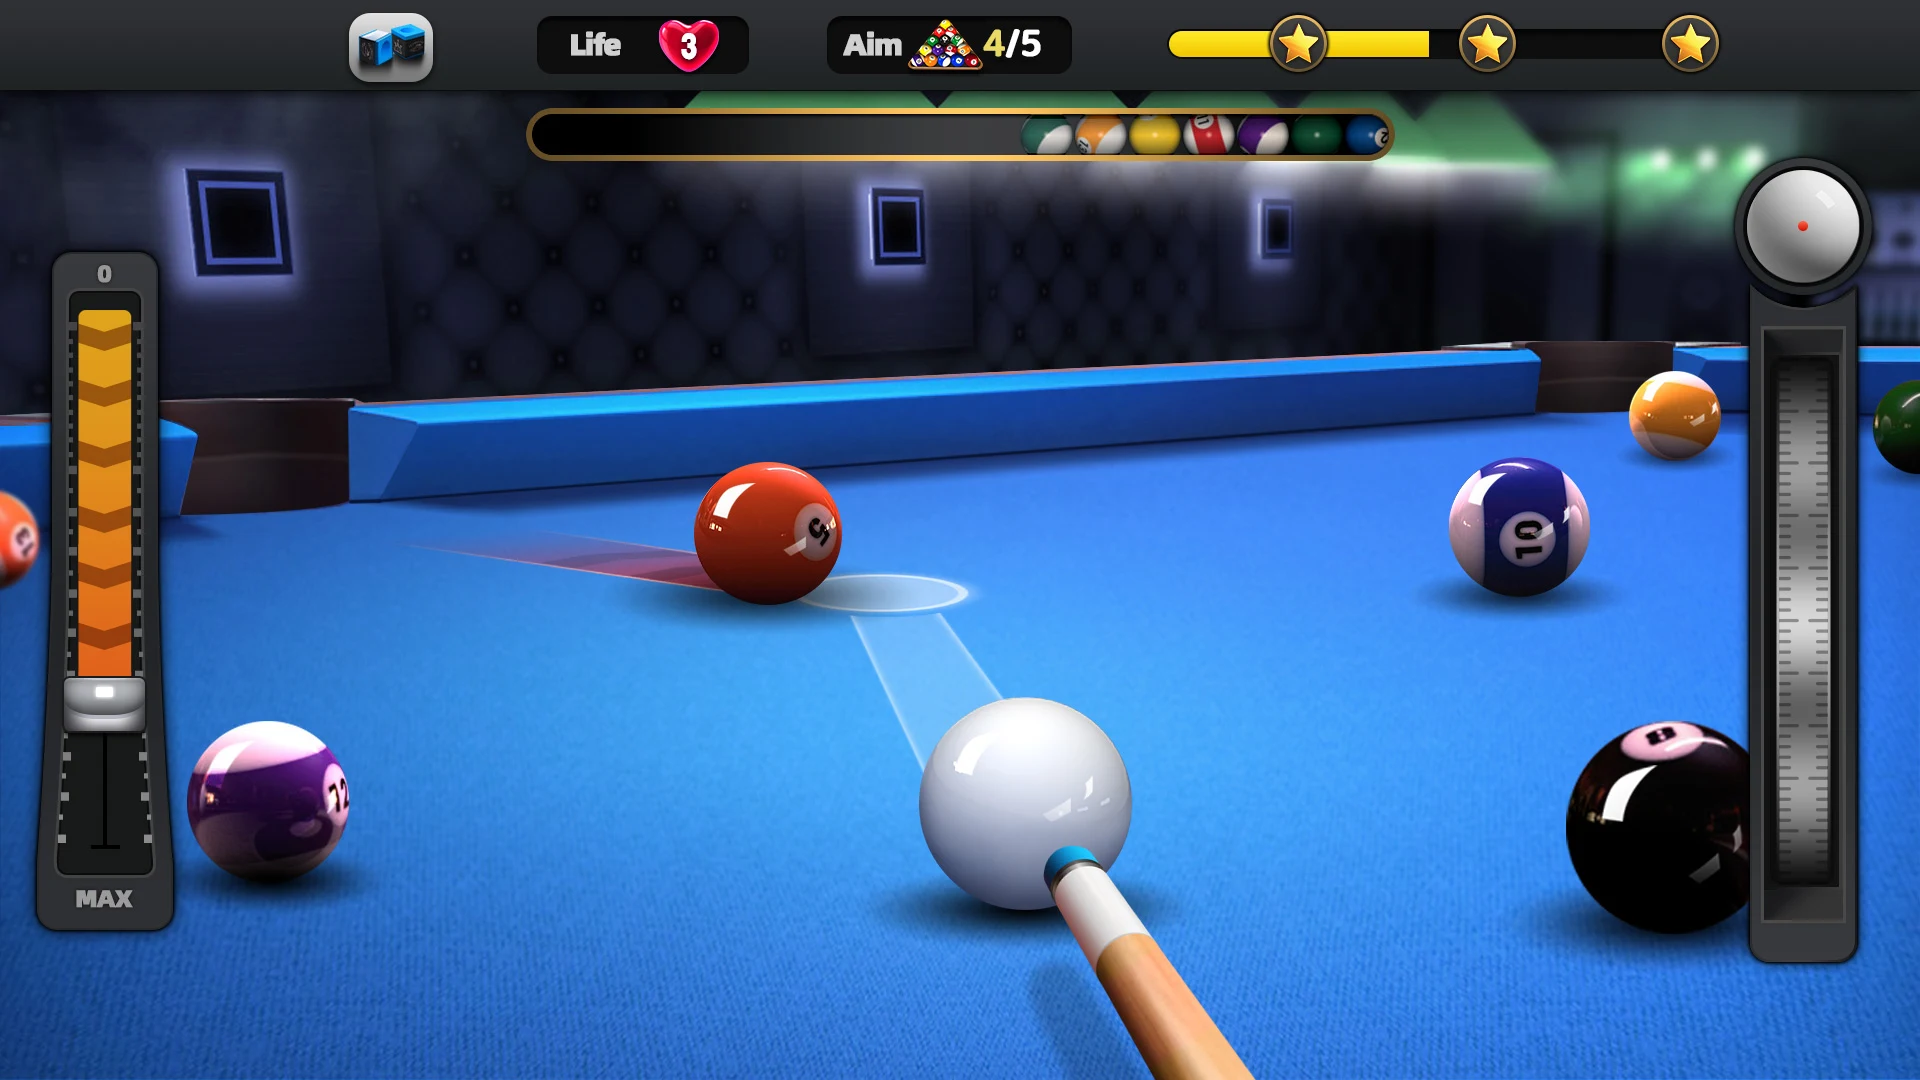 🔥 Download 8 ball pool 3d 8 Pool Billiards offline game 2.0.4 [Free  Shopping] APK MOD. Sophisticated sports simulator with realistic physics 